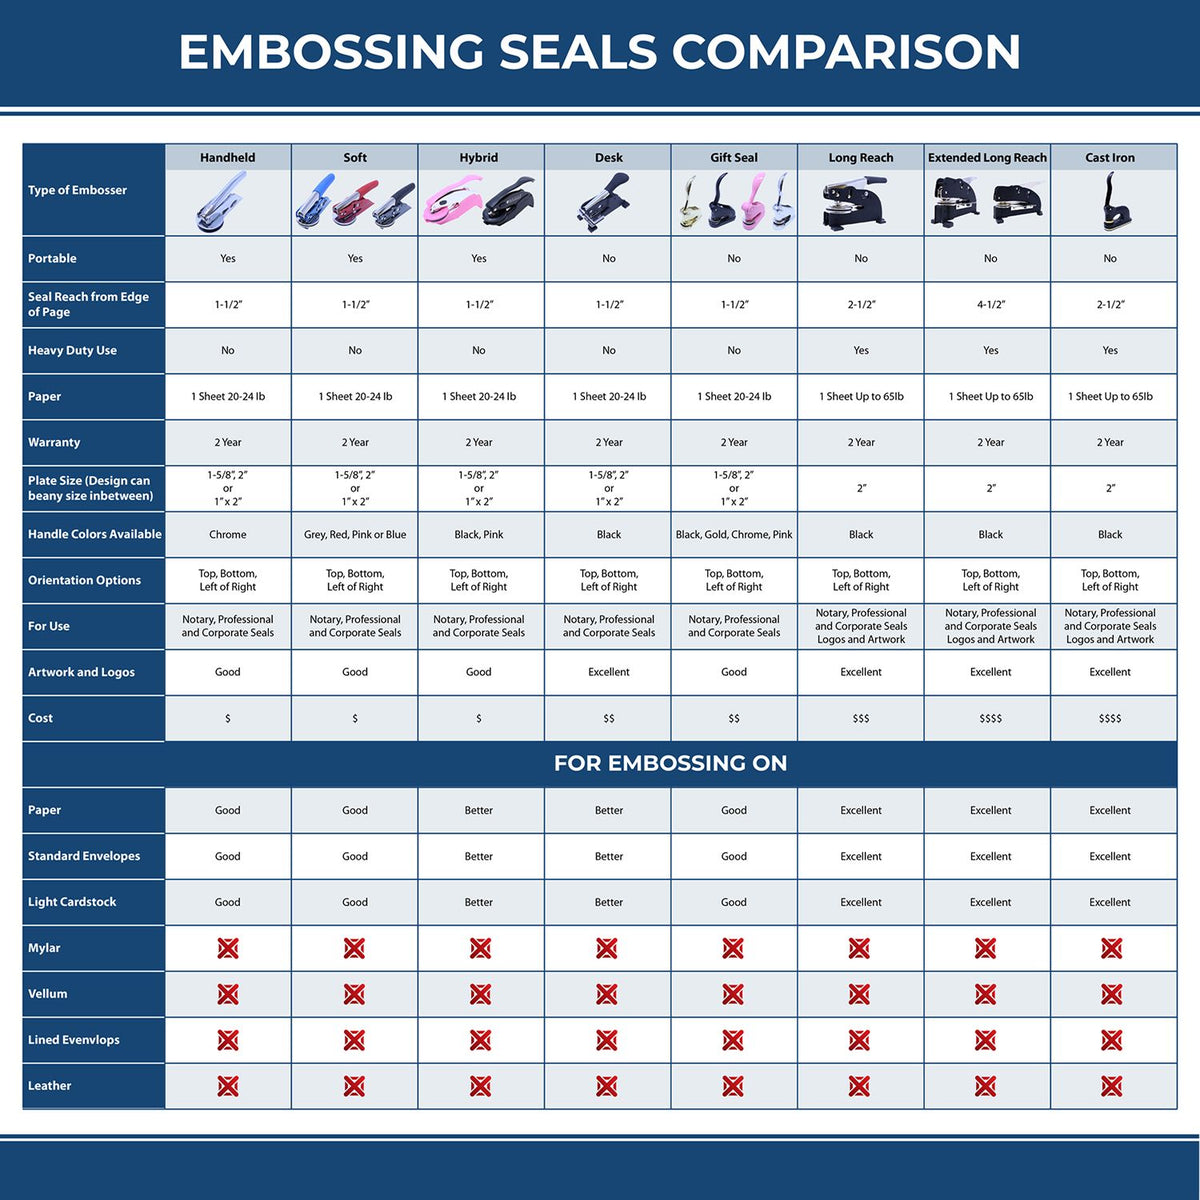 A comparison chart for the different types of mount models available for the Long Reach Iowa PE Seal.